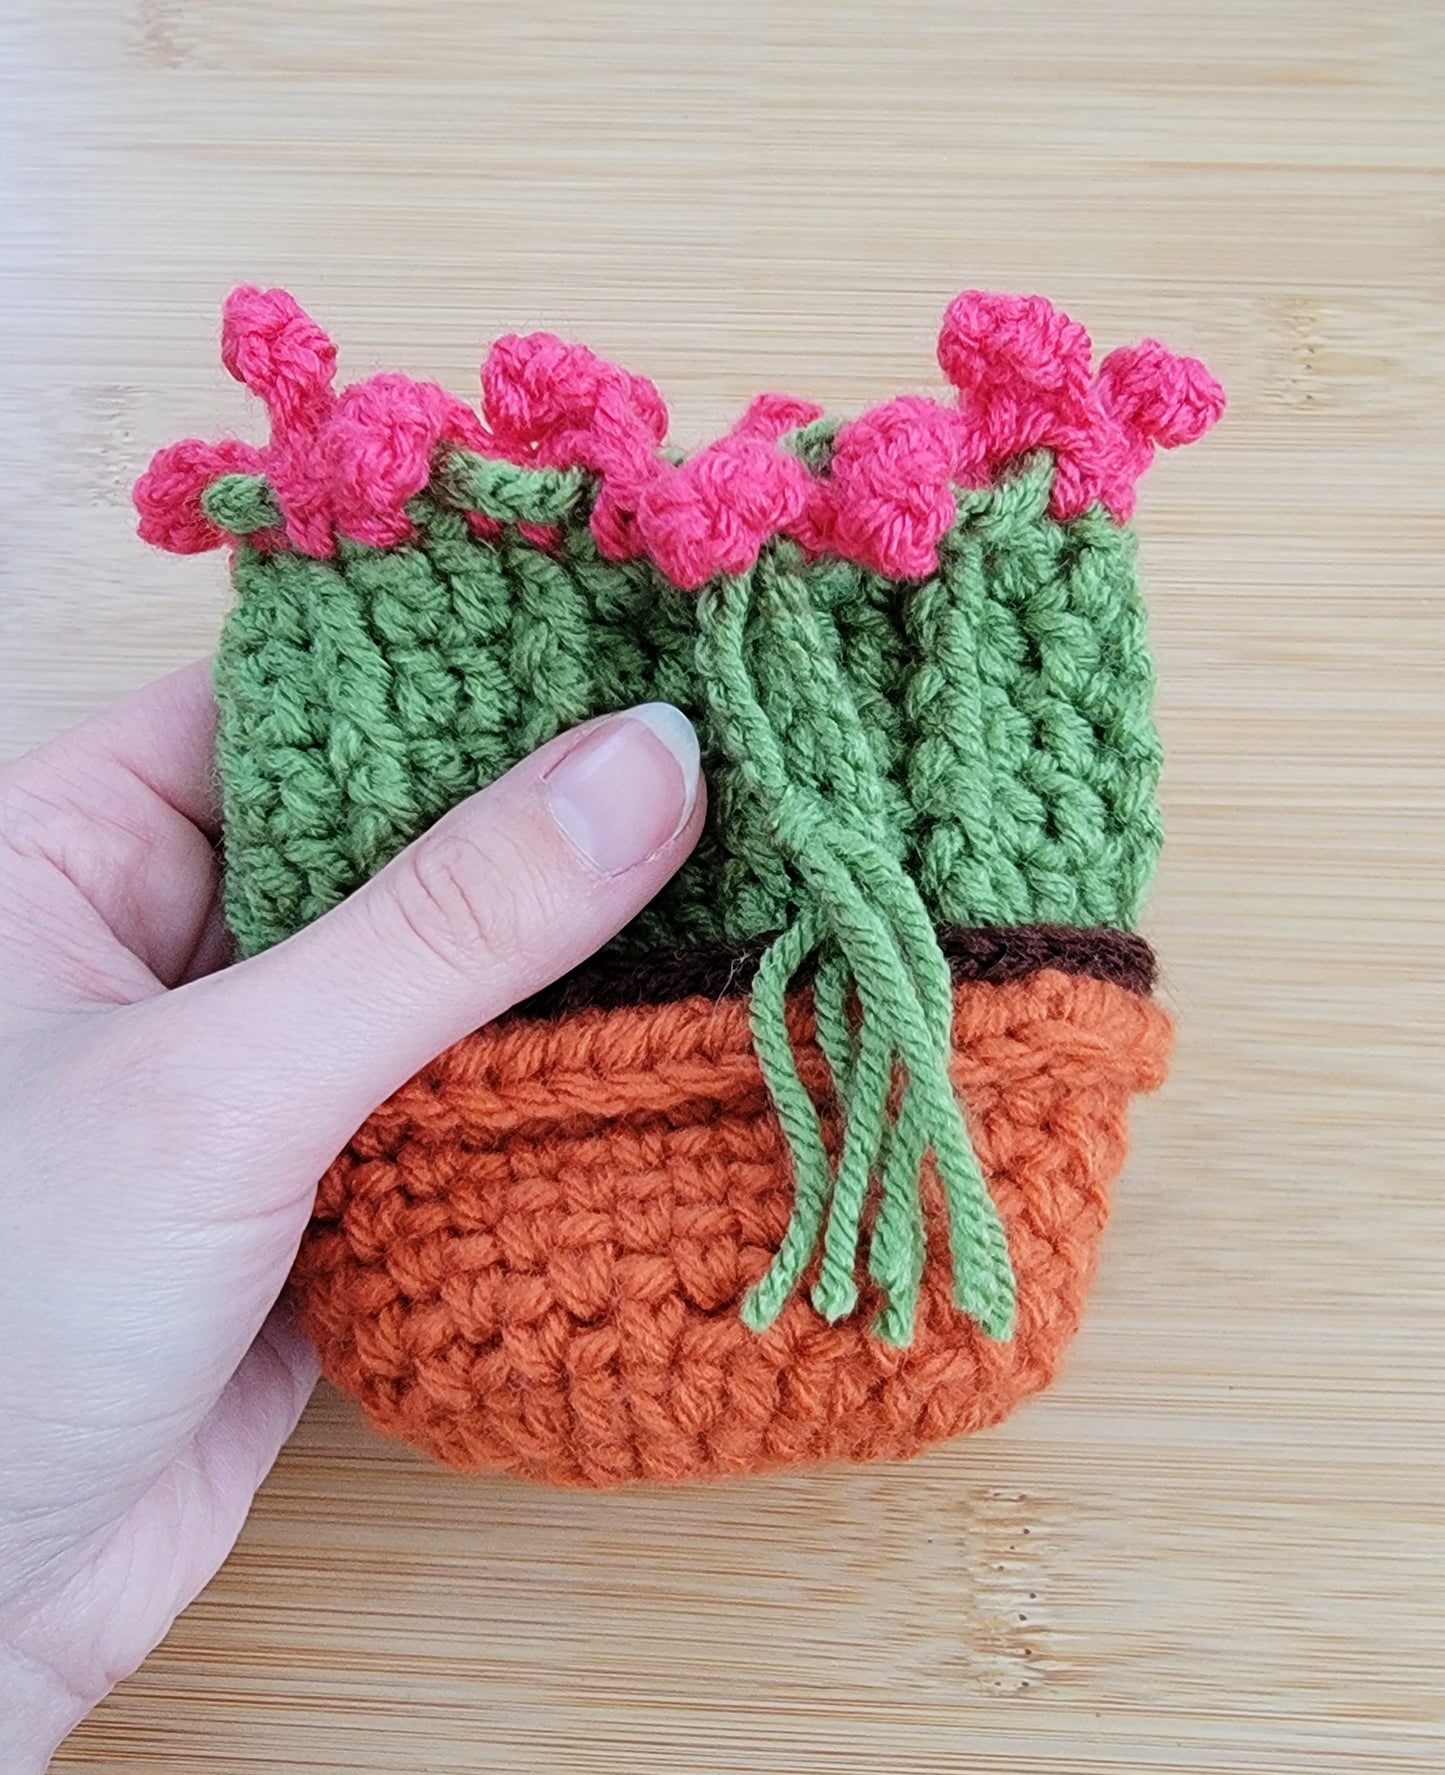 Cactus Dice Bag - Hand crocheted Draw String Pouch